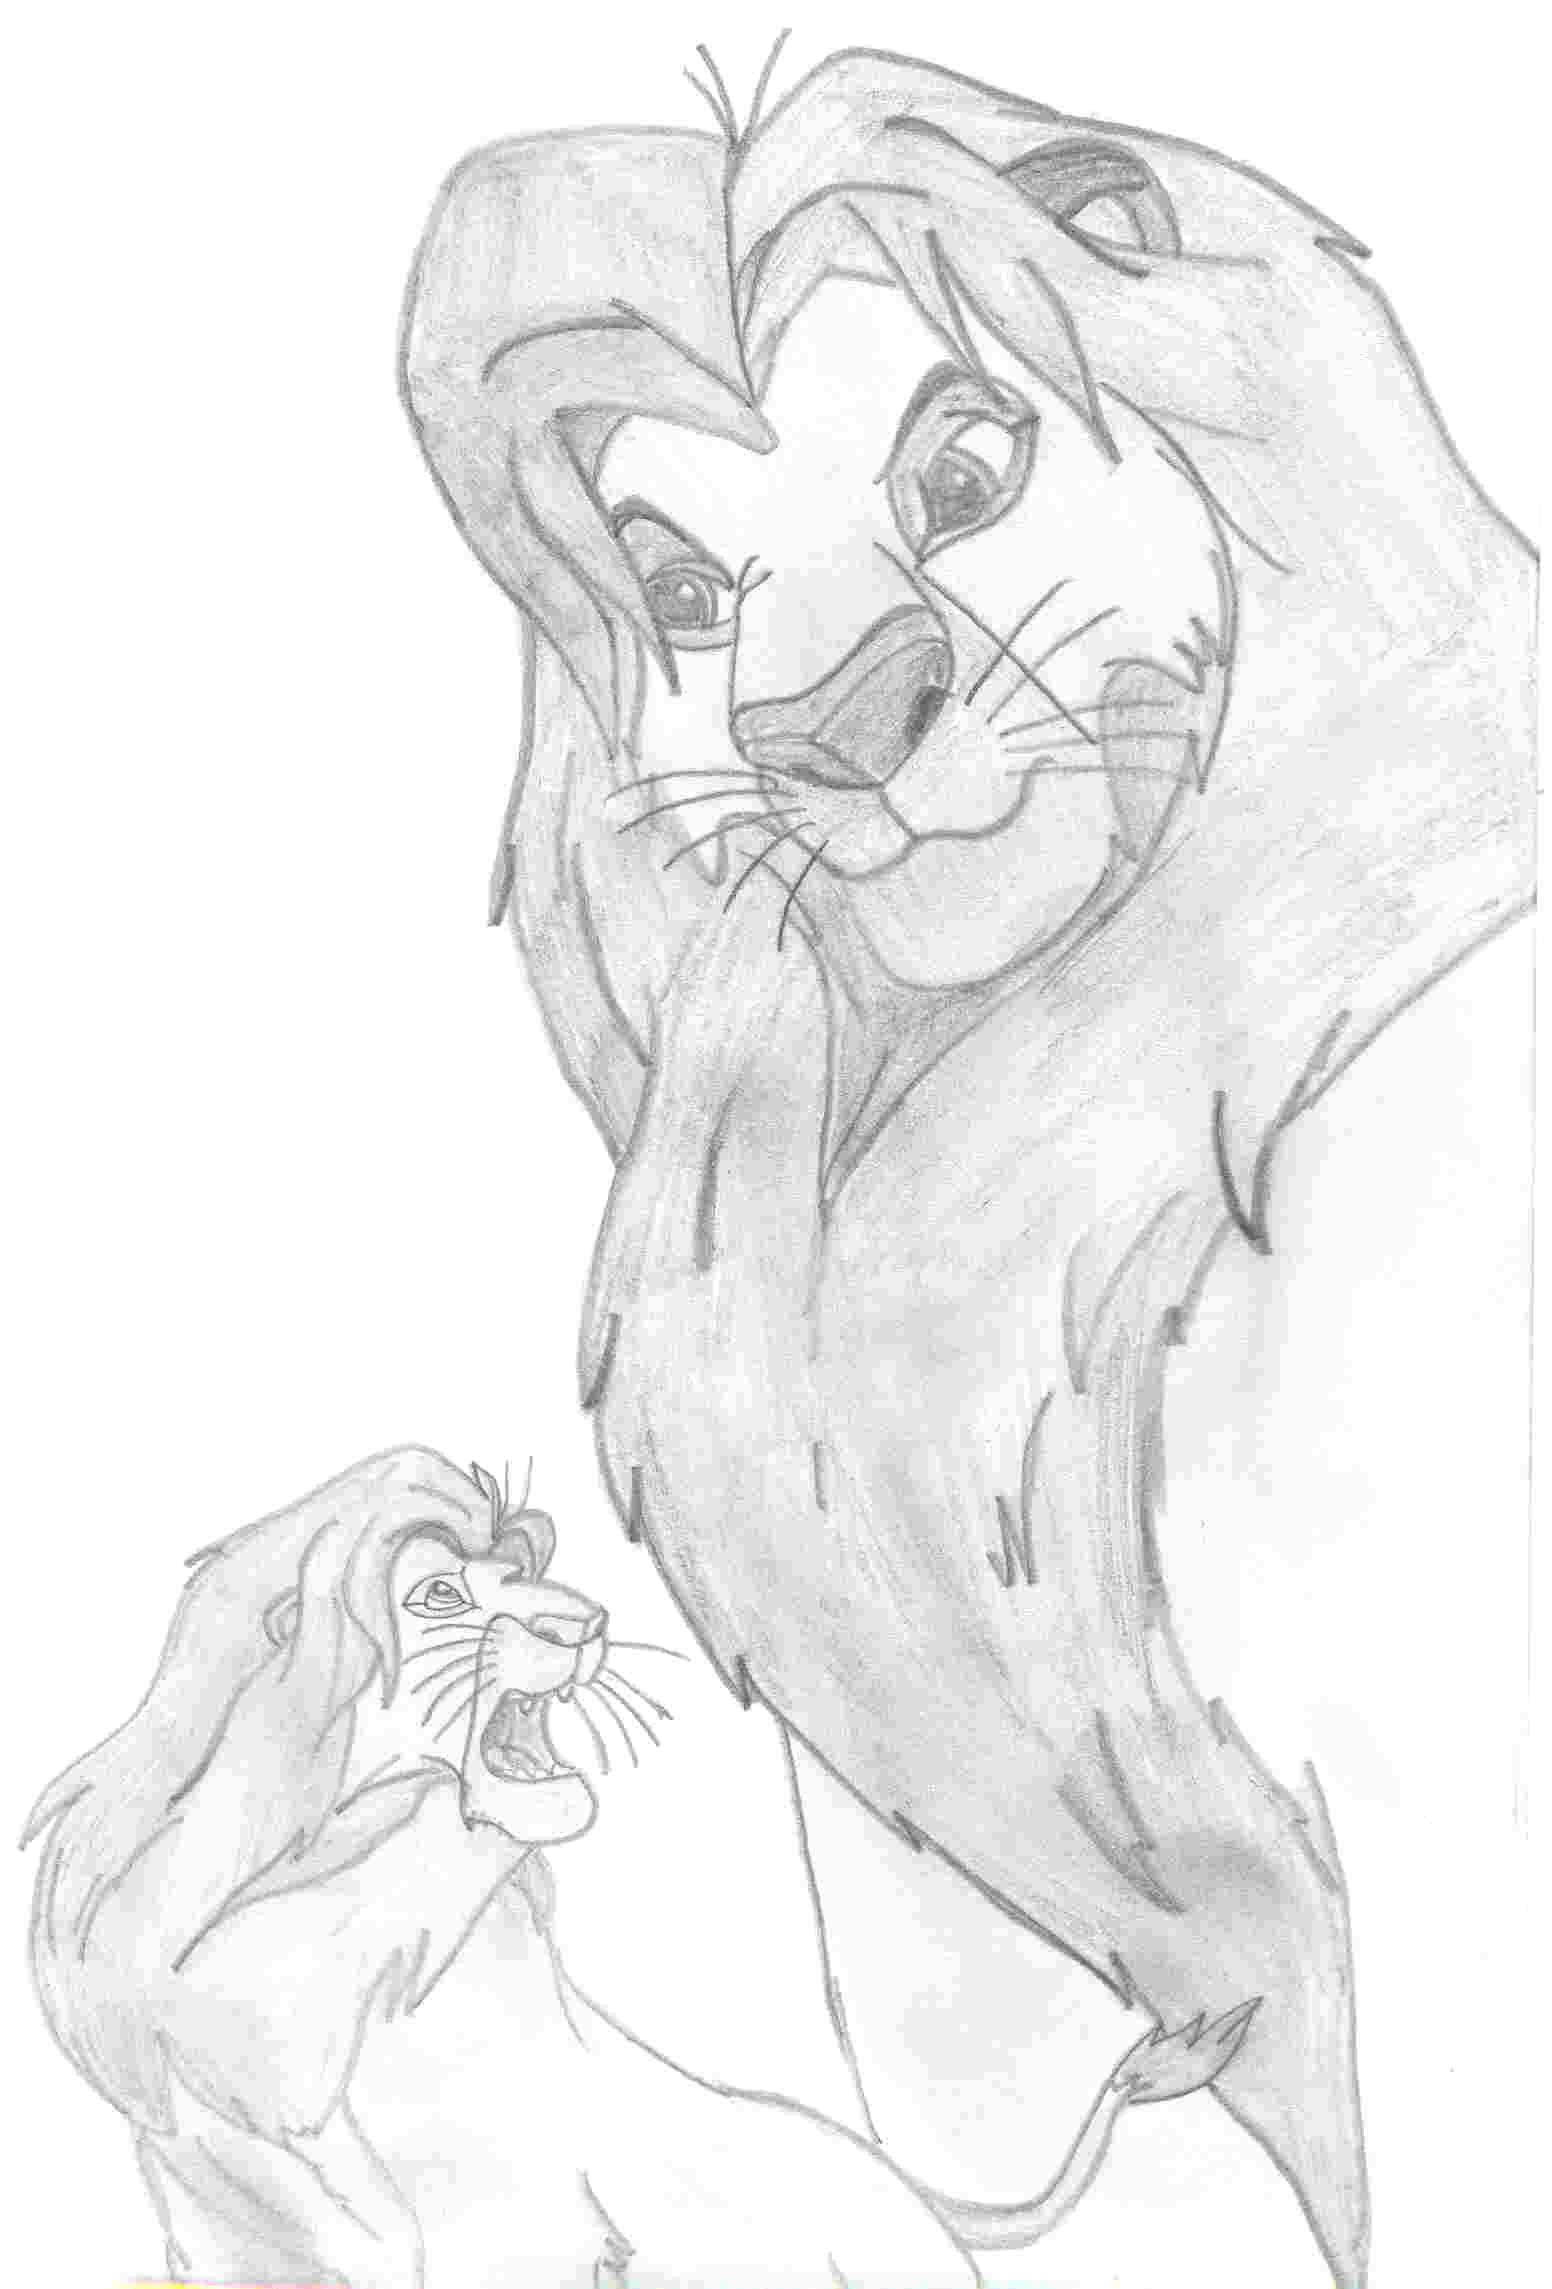 simba king to the end by GIRL_WITH_DREAMS